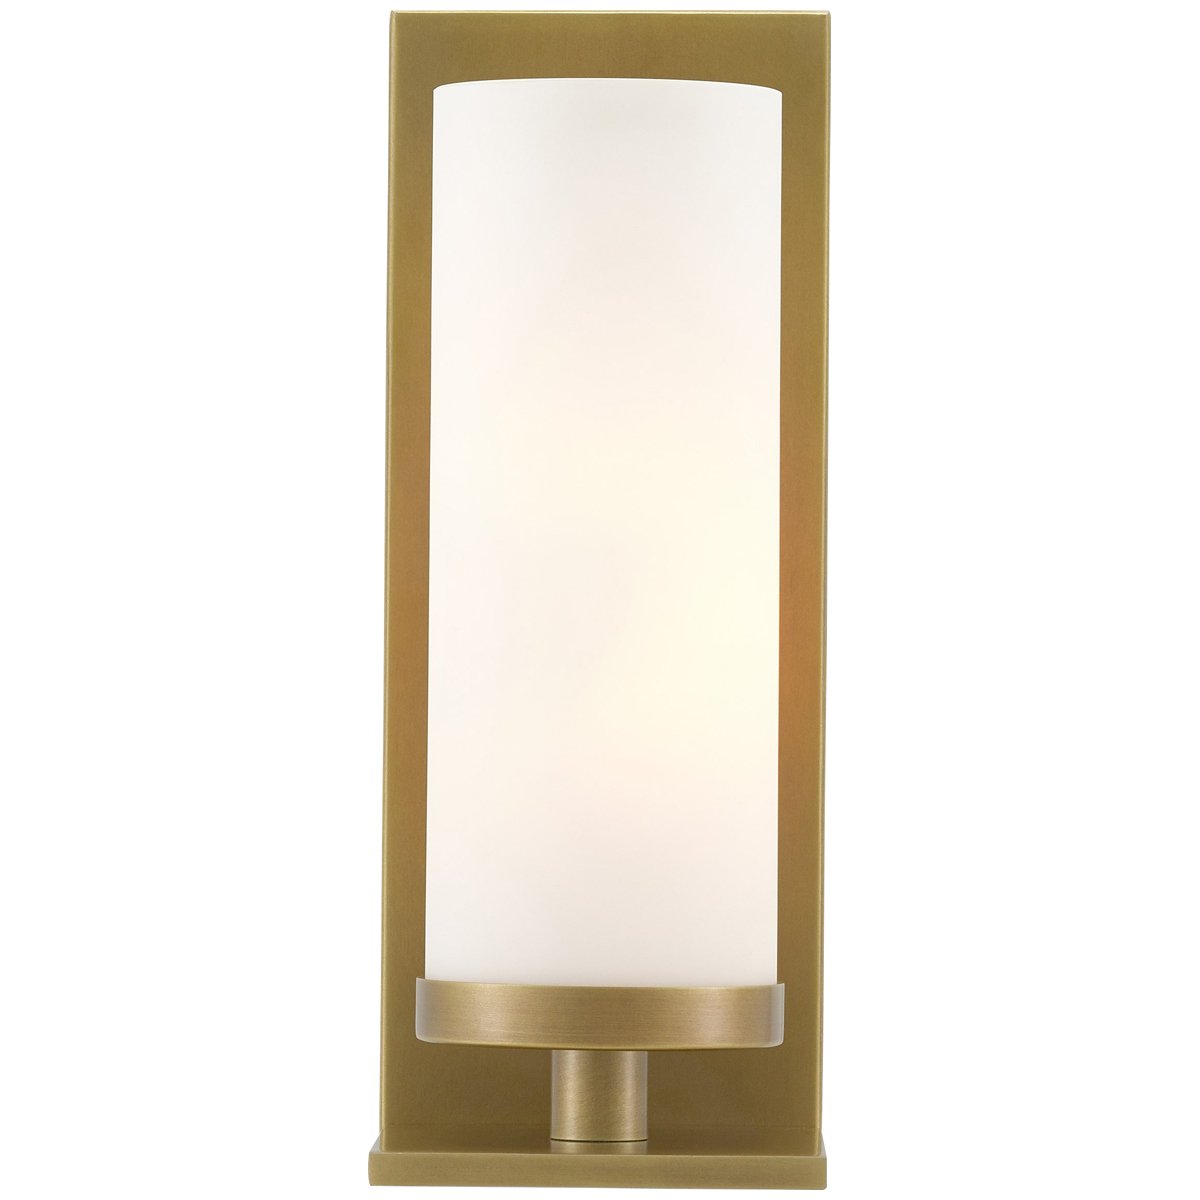 Currey and Company Bournemouth Wall Sconce